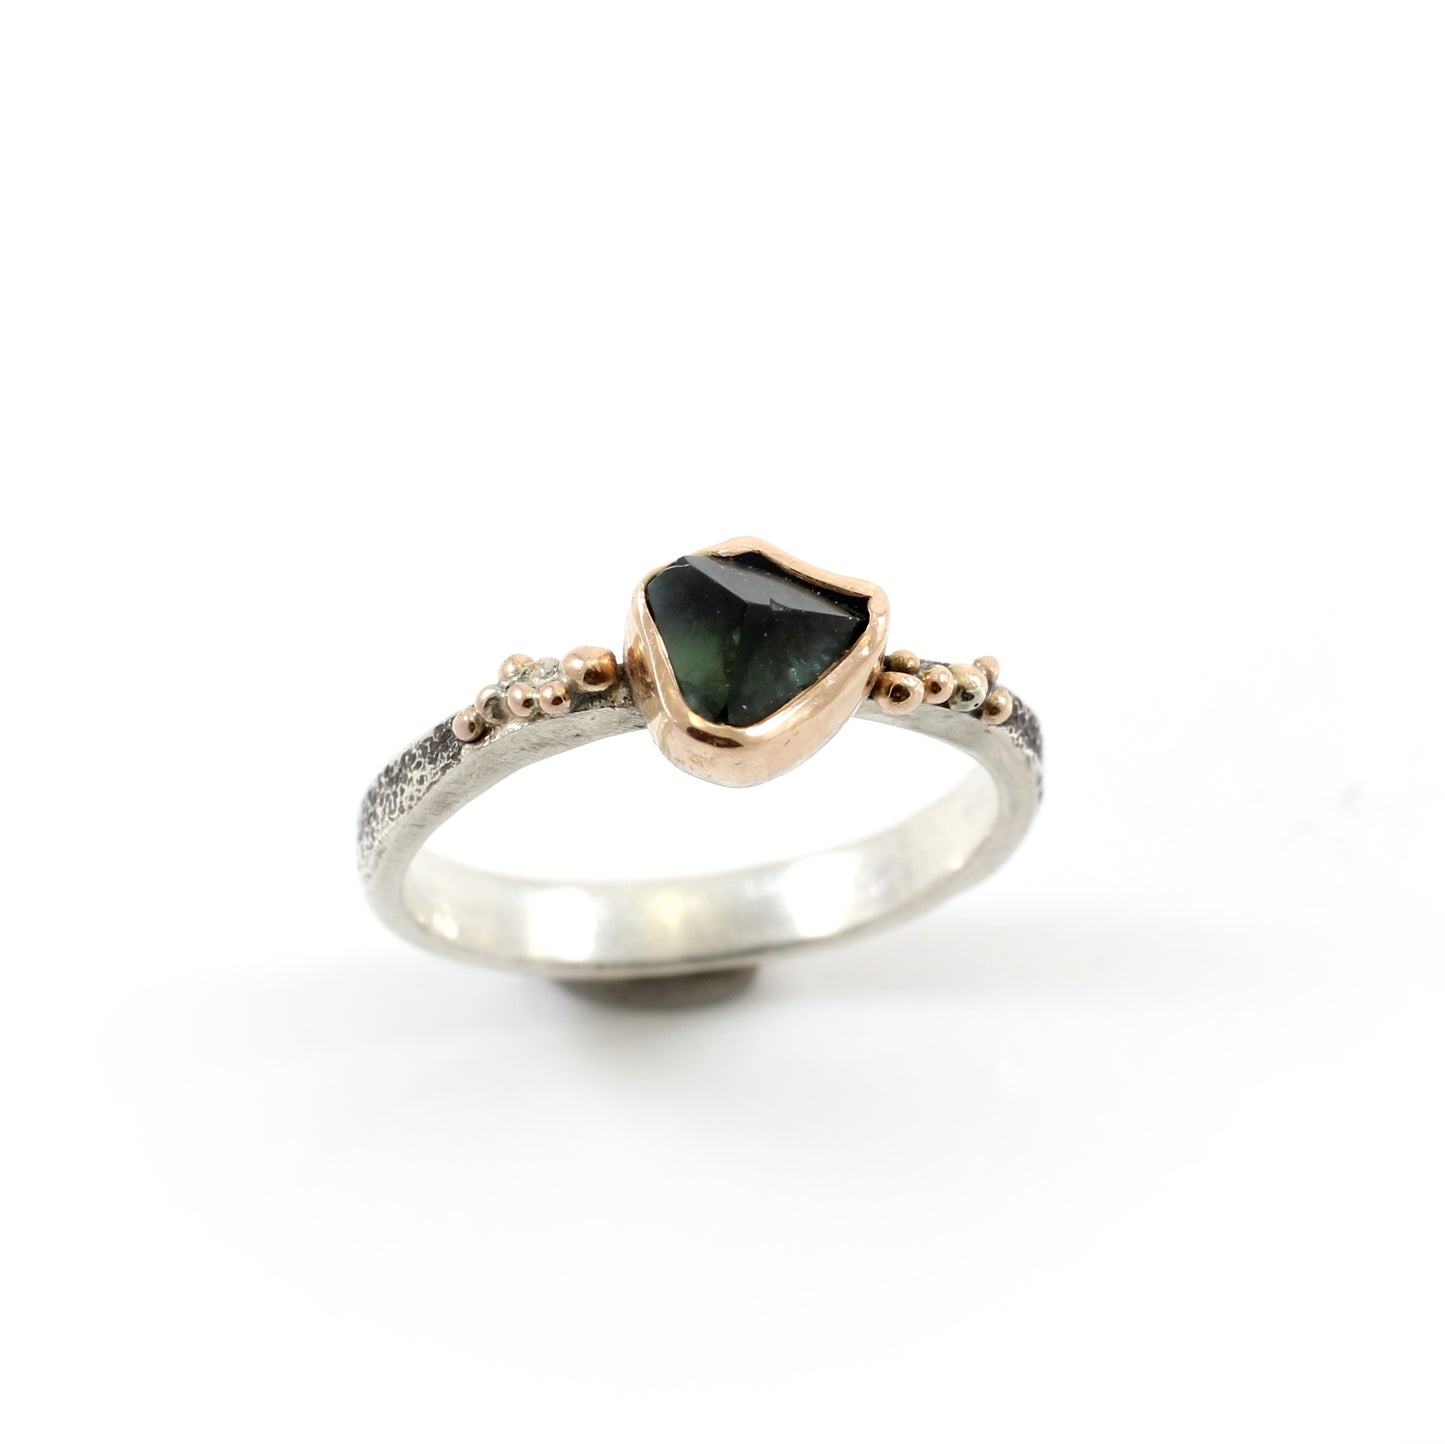 Sophie Sapphire Ring - A green blue sapphire ring in silver rose gold